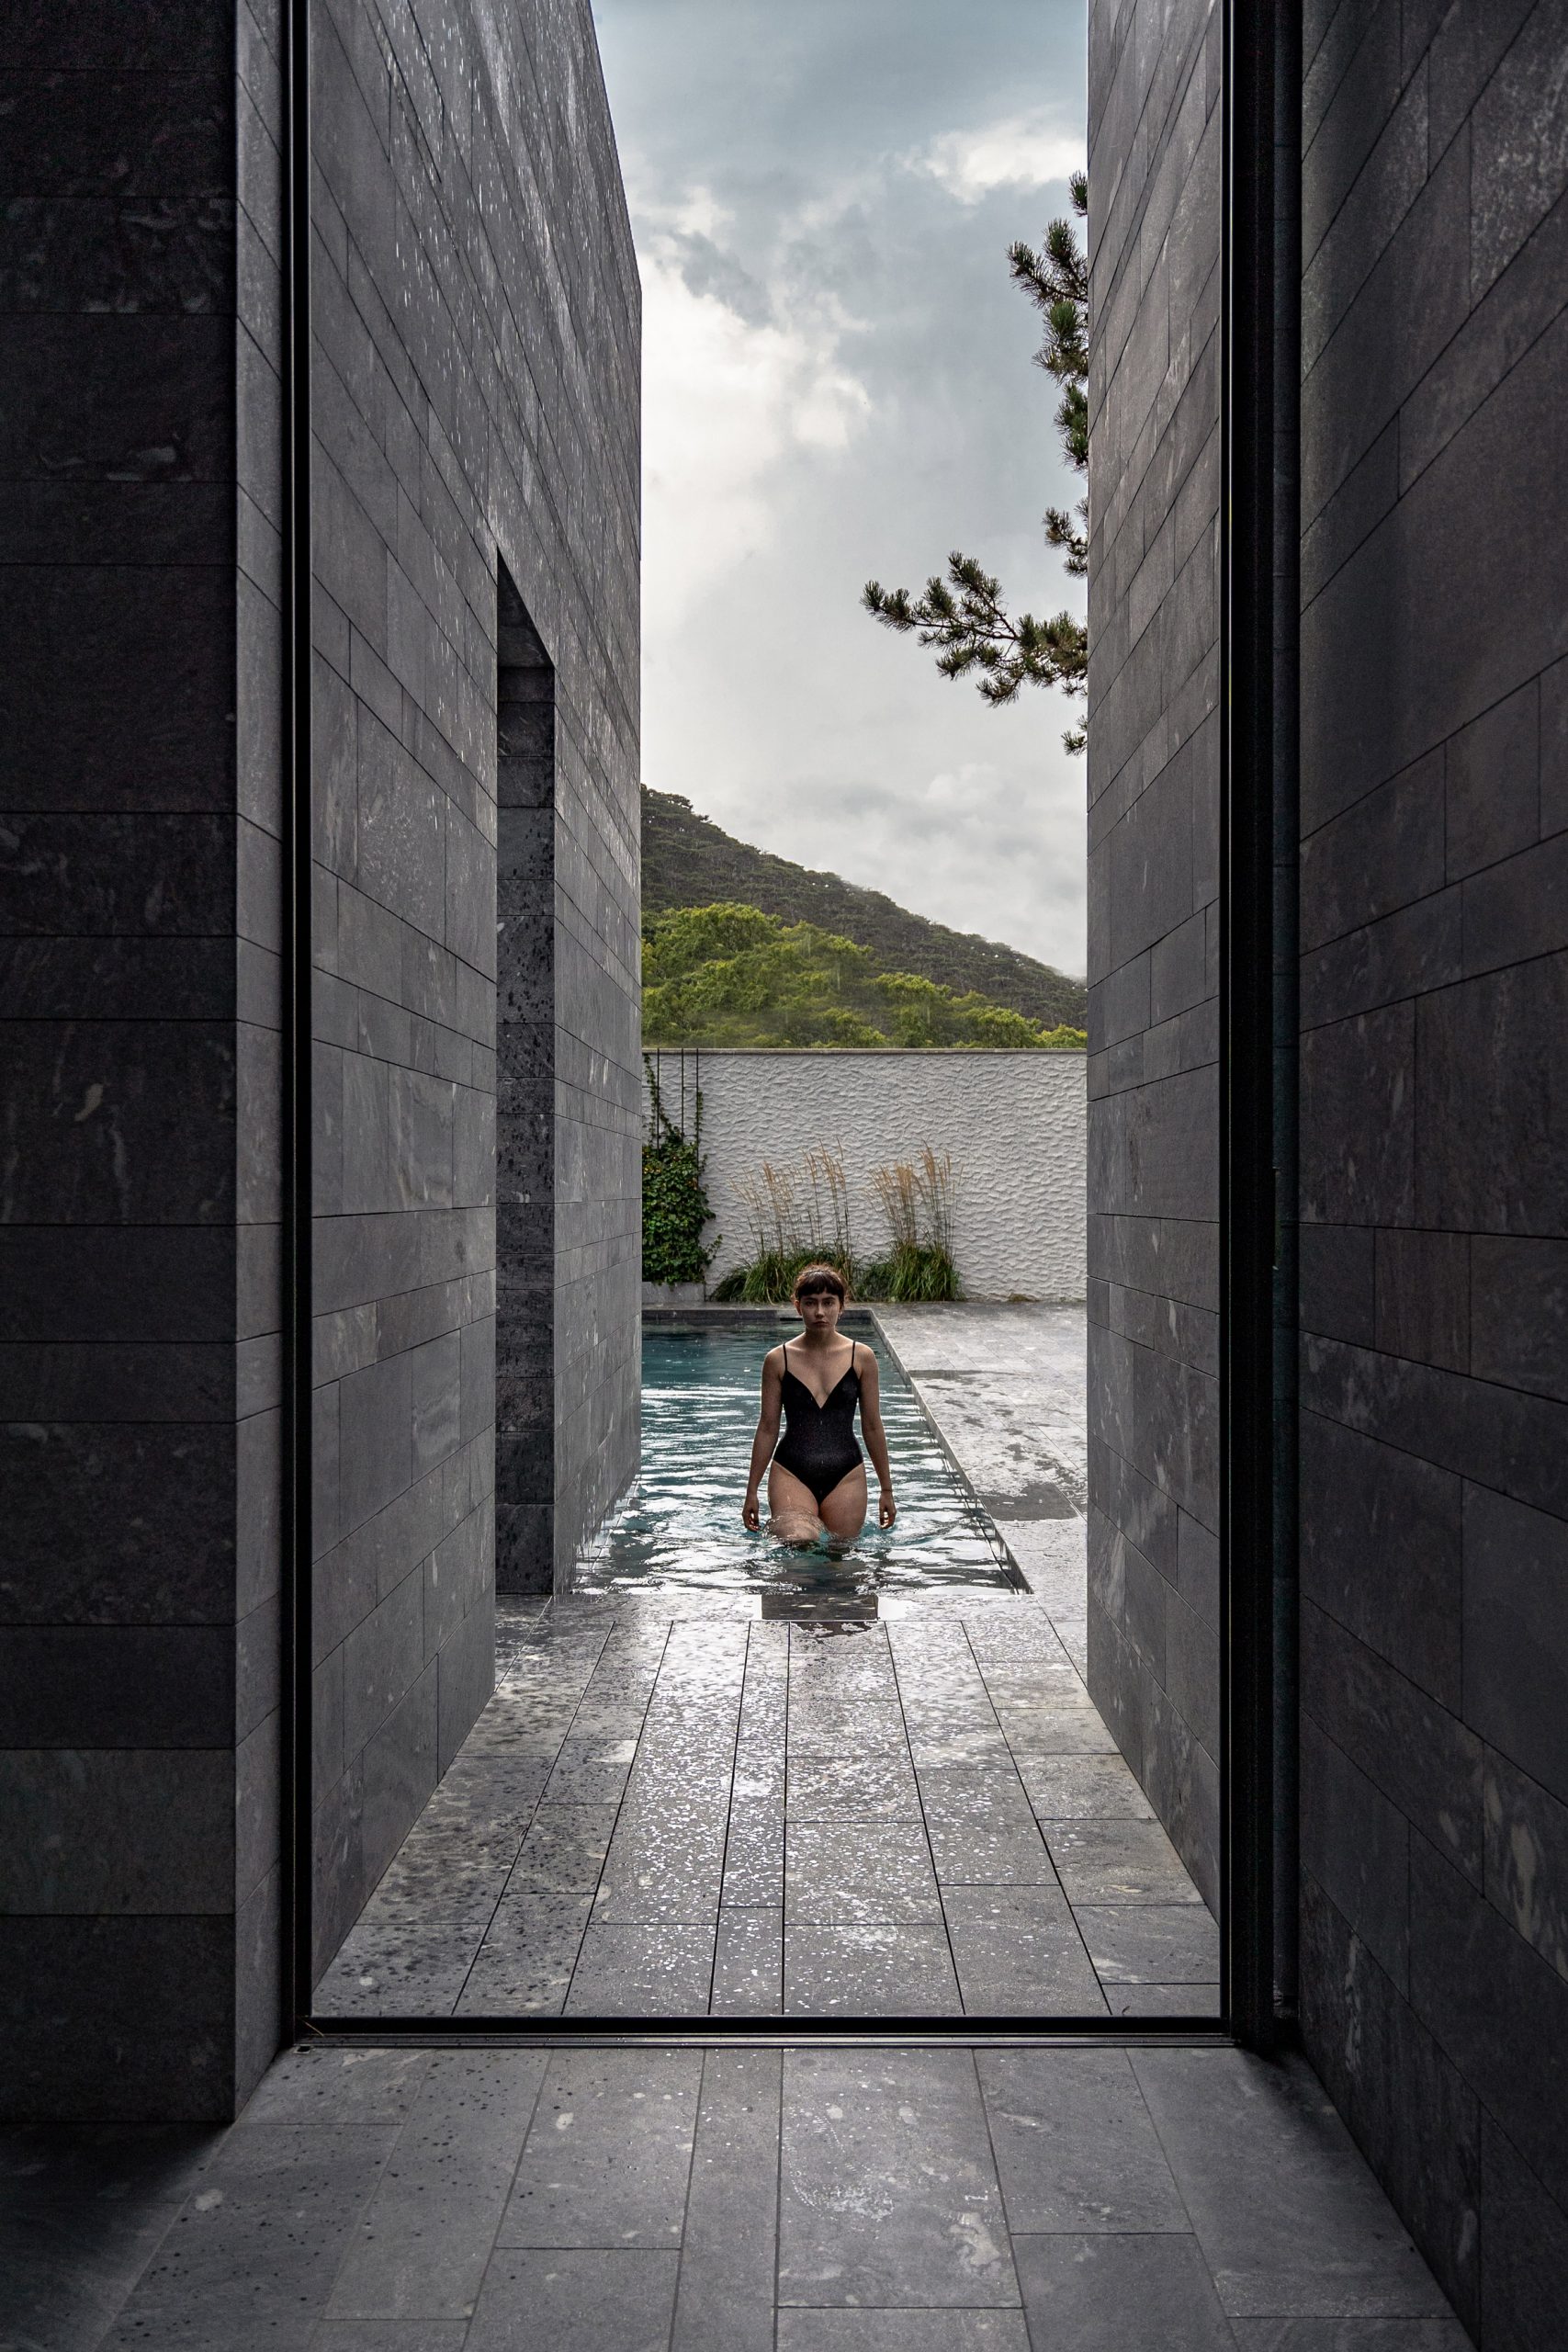 A view to a private swimming pool from a stone spa